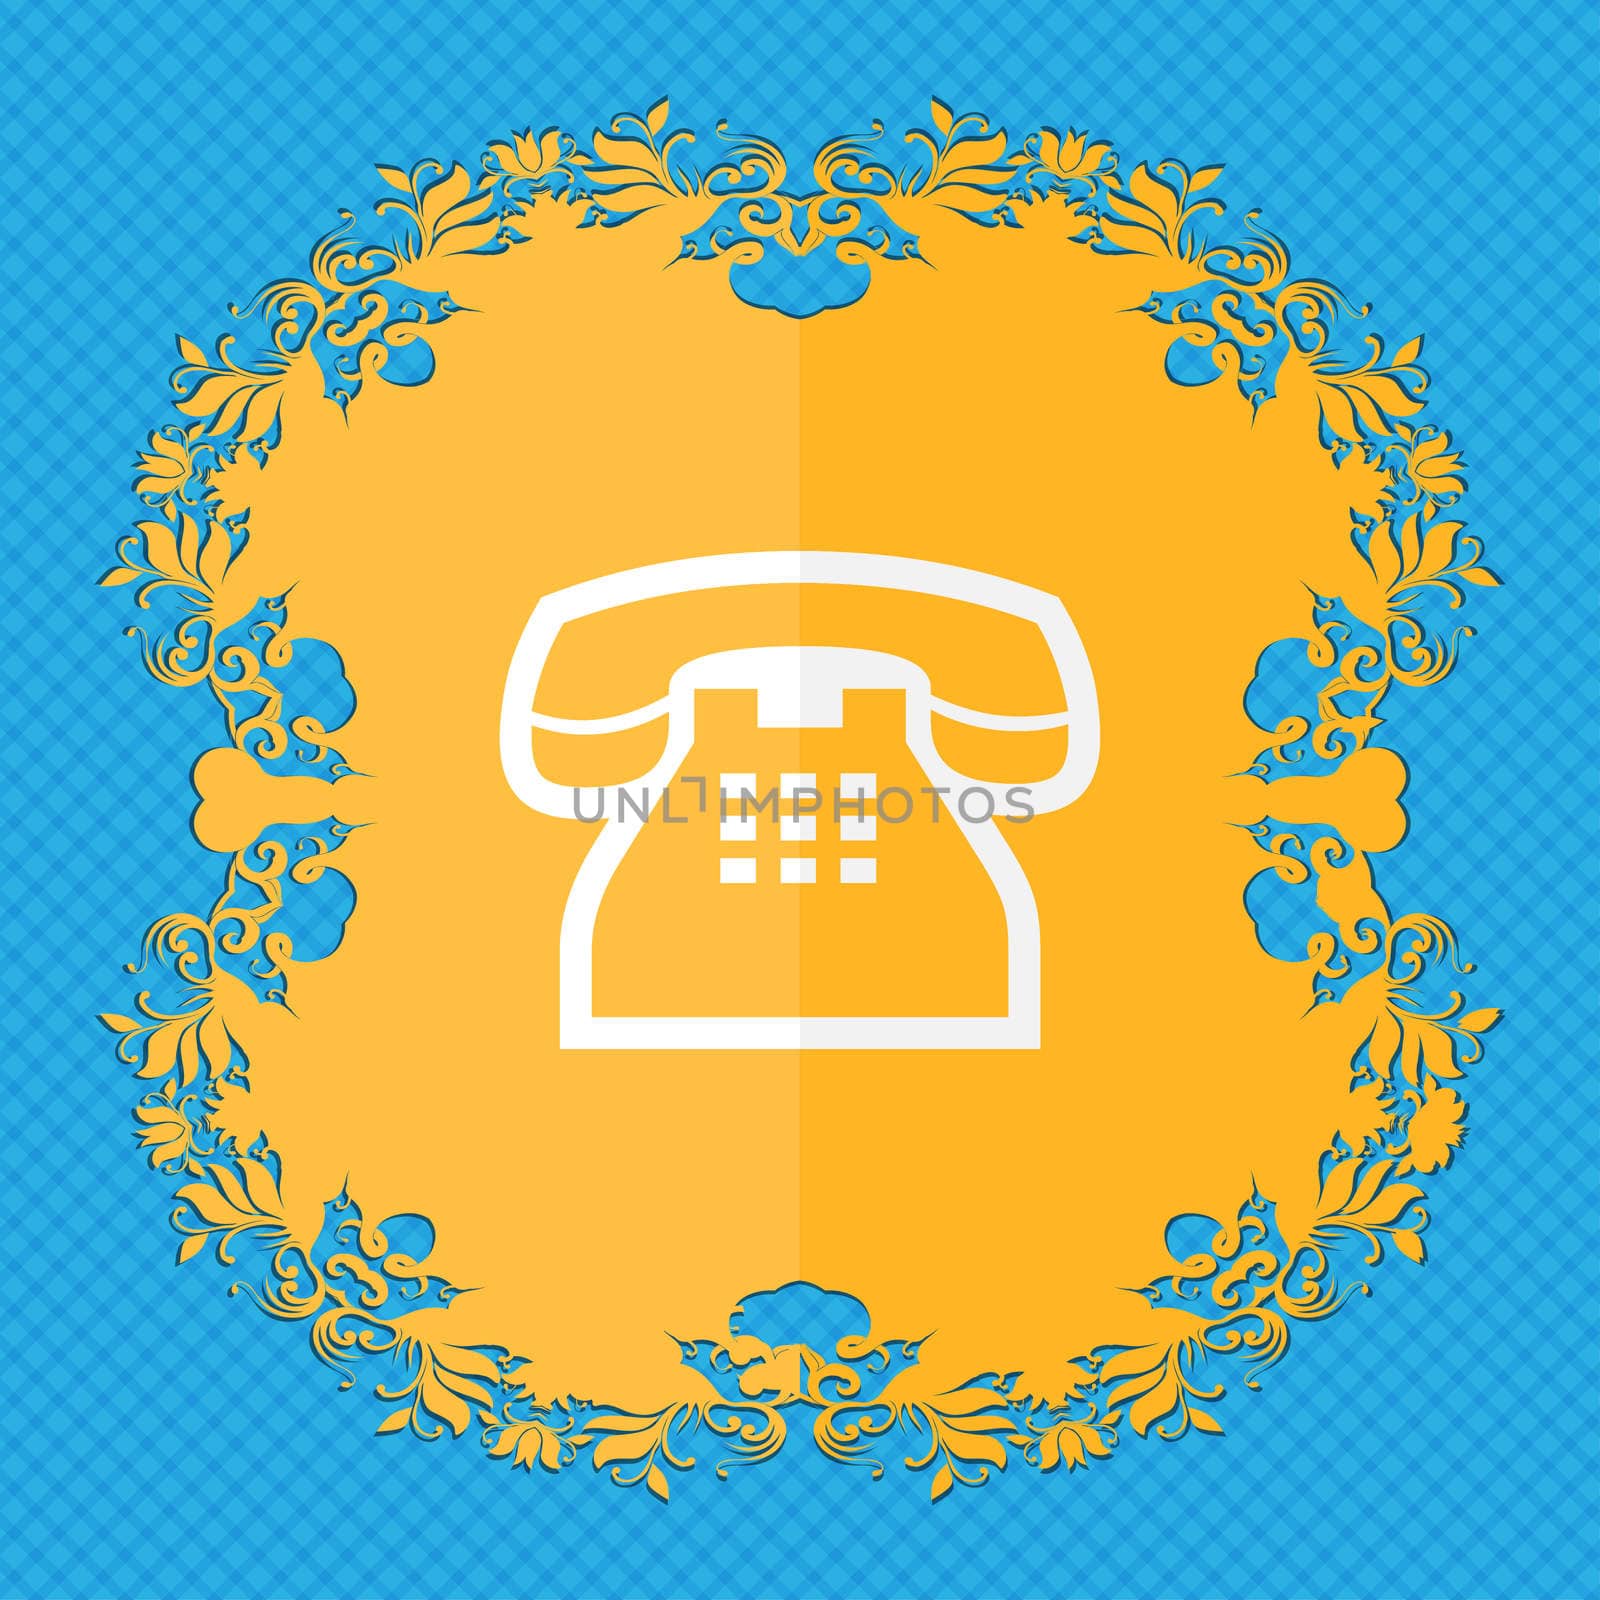 retro telephone handset. Floral flat design on a blue abstract background with place for your text. illustration